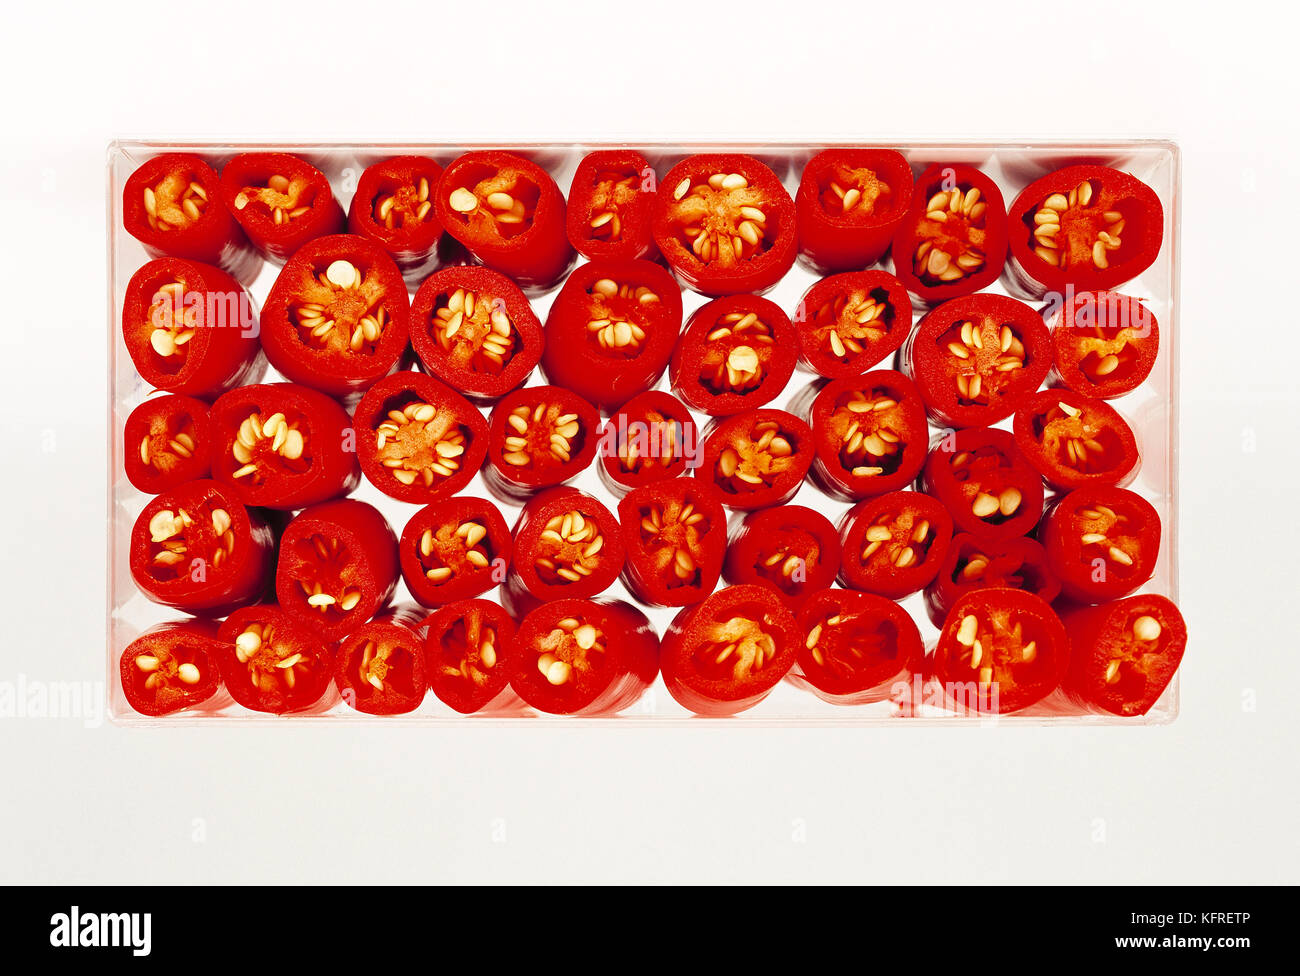 Still life. Food. Close up of sliced red chilli peppers in ceramic dish. Stock Photo